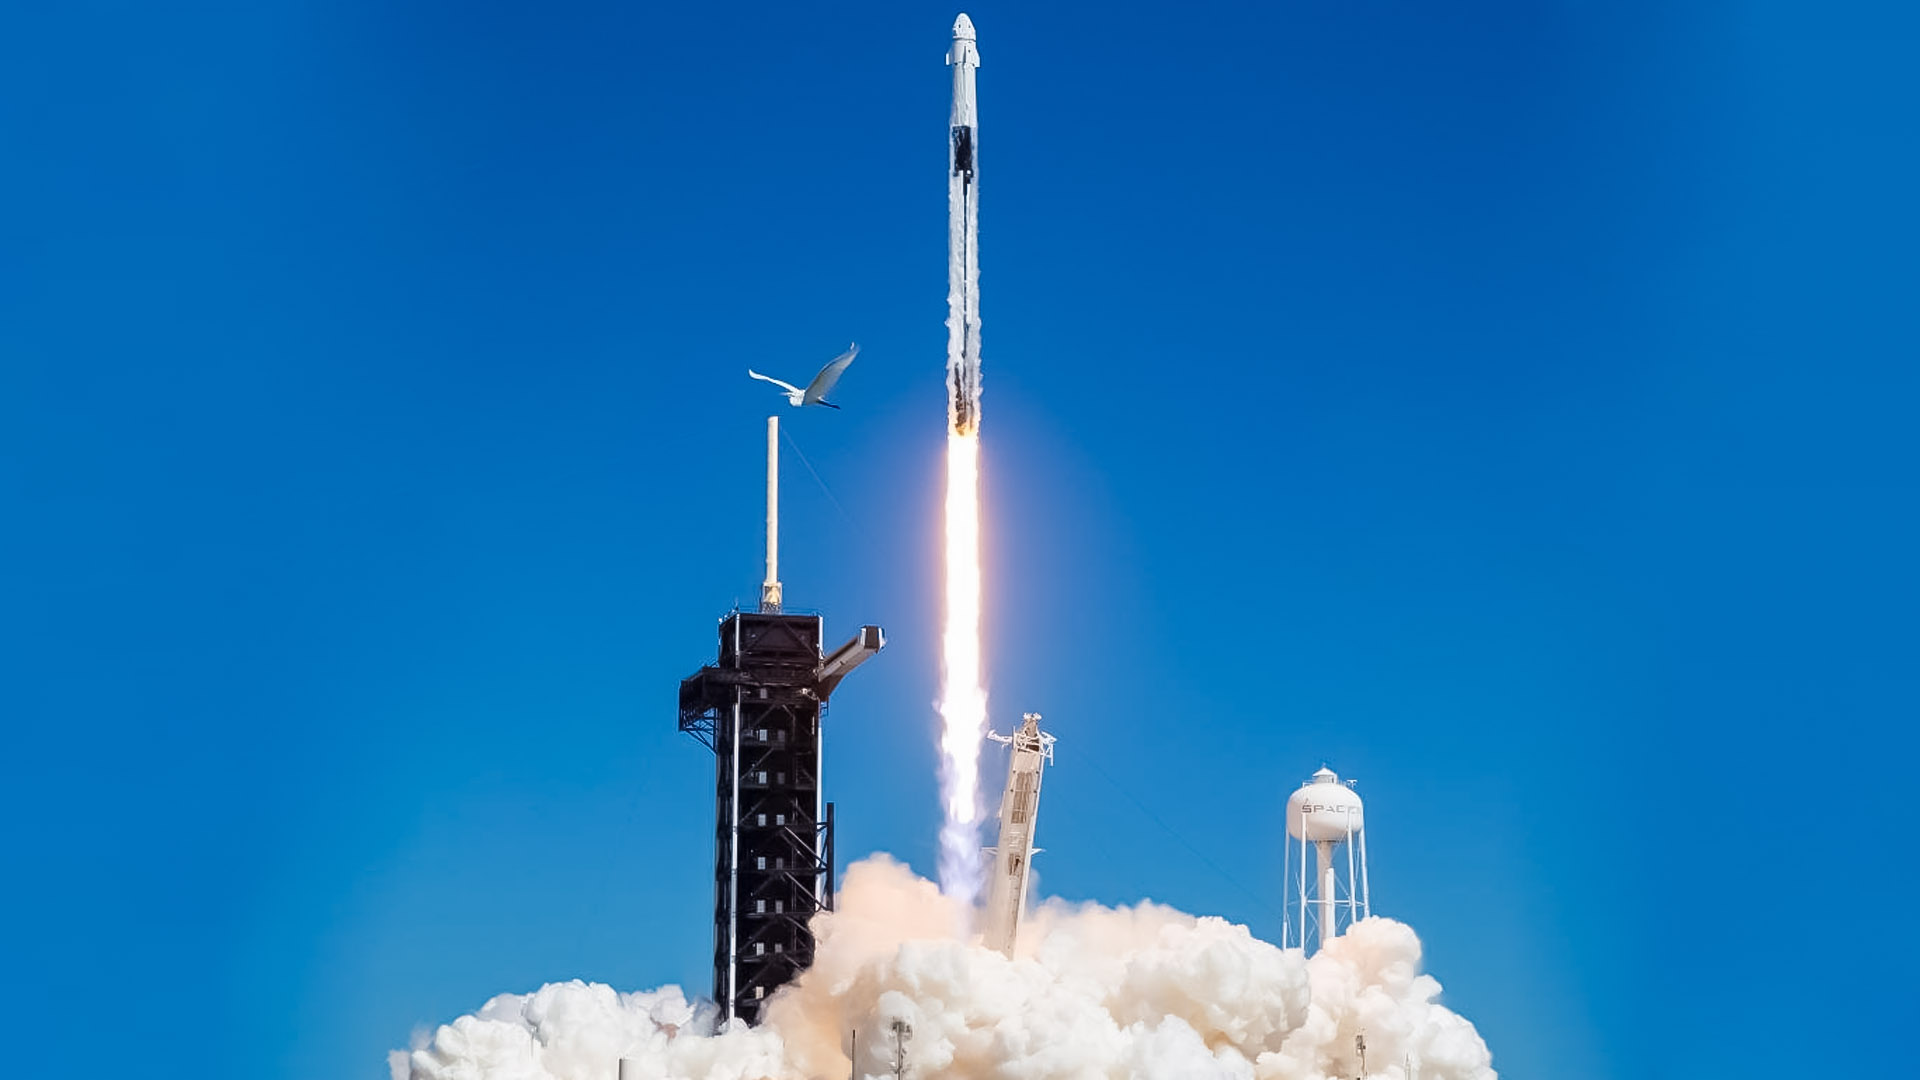 Crewed mission to the International Space Station launched by NASA and SpaceX